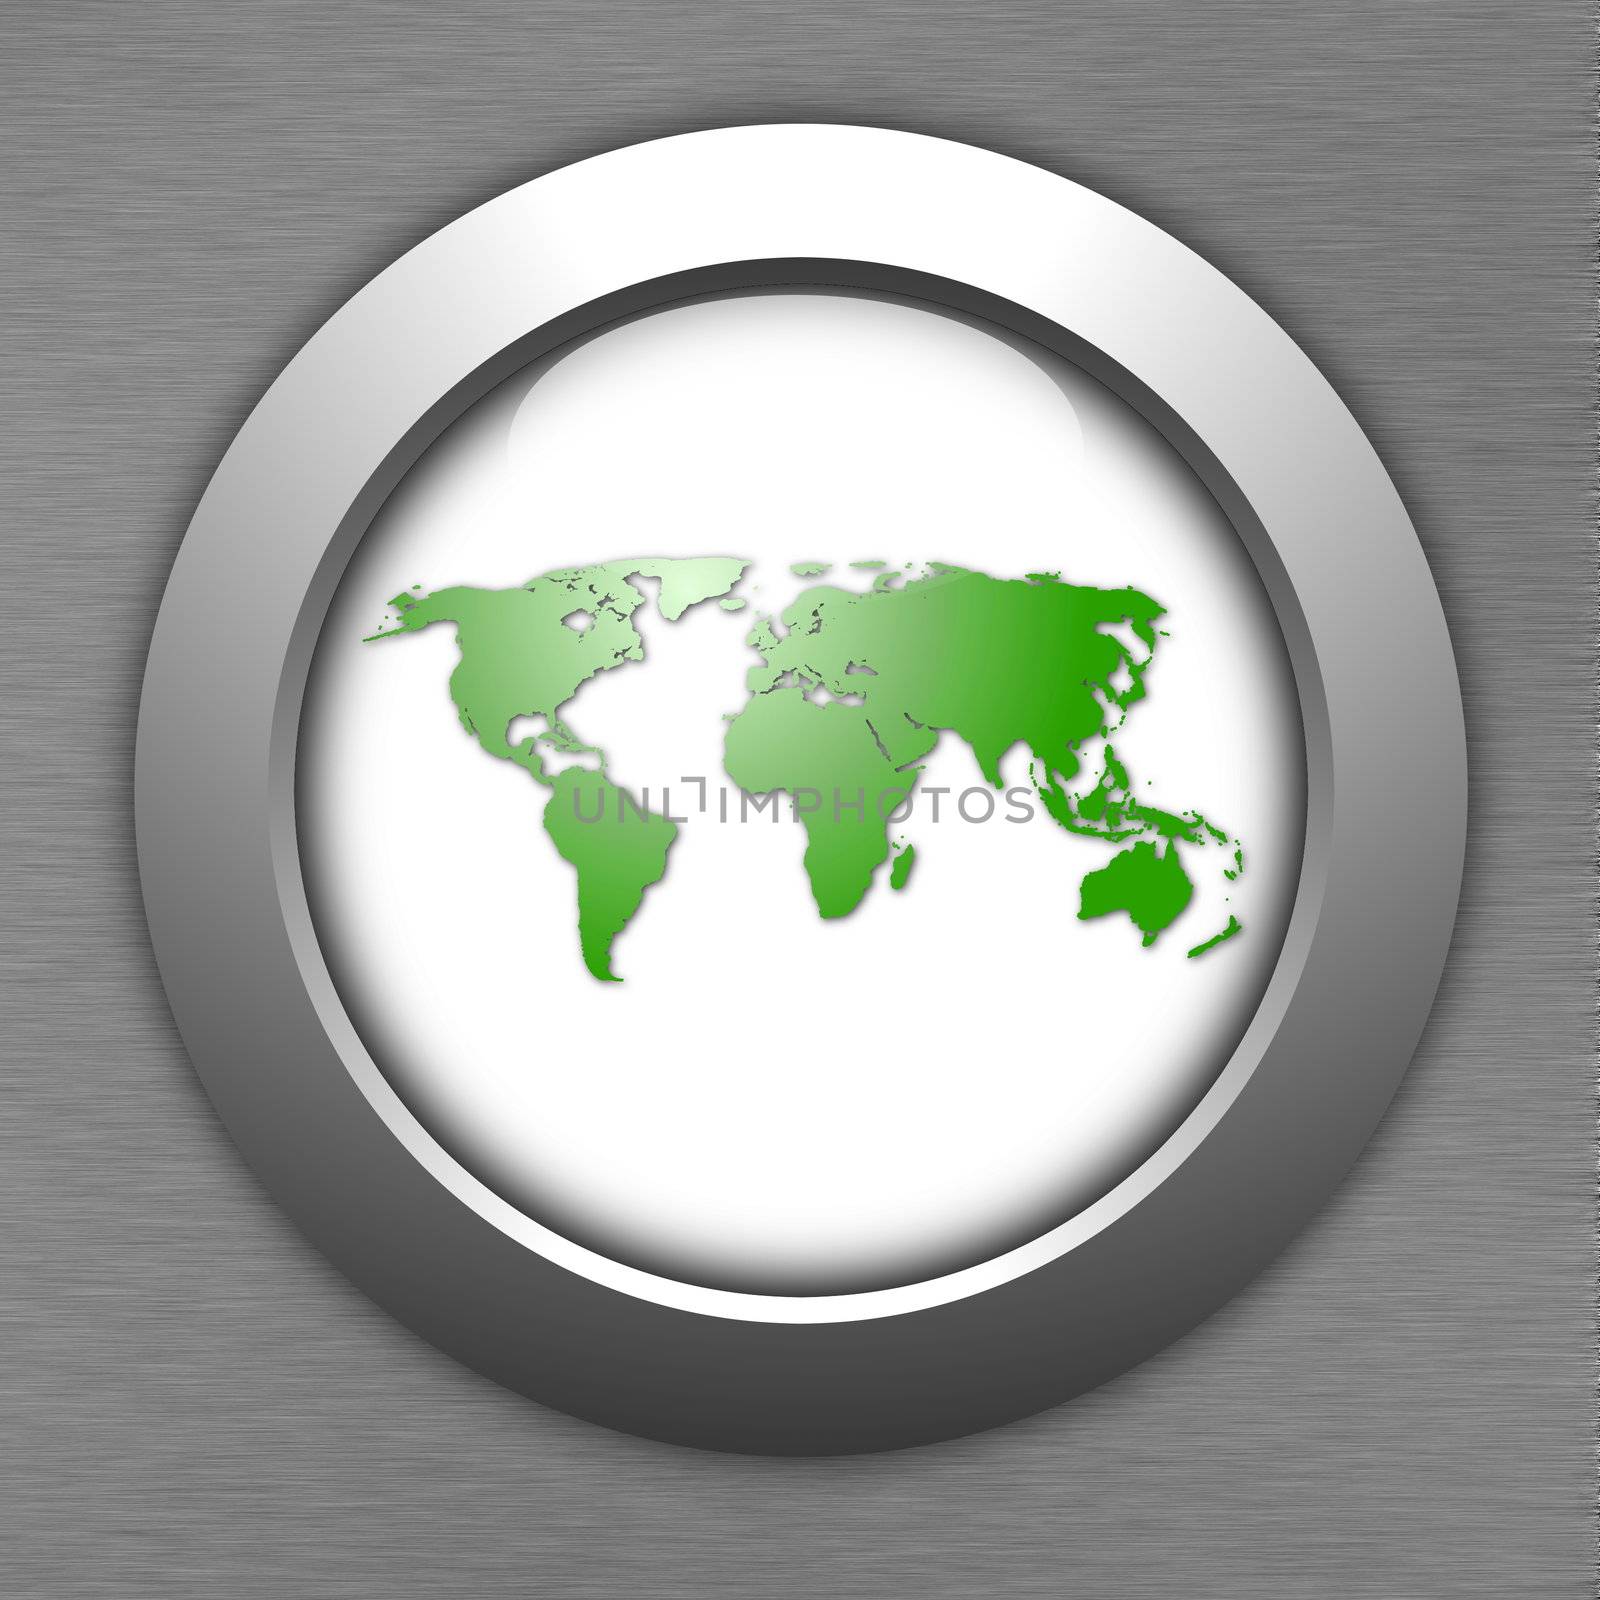 globe or world map in a button illustration